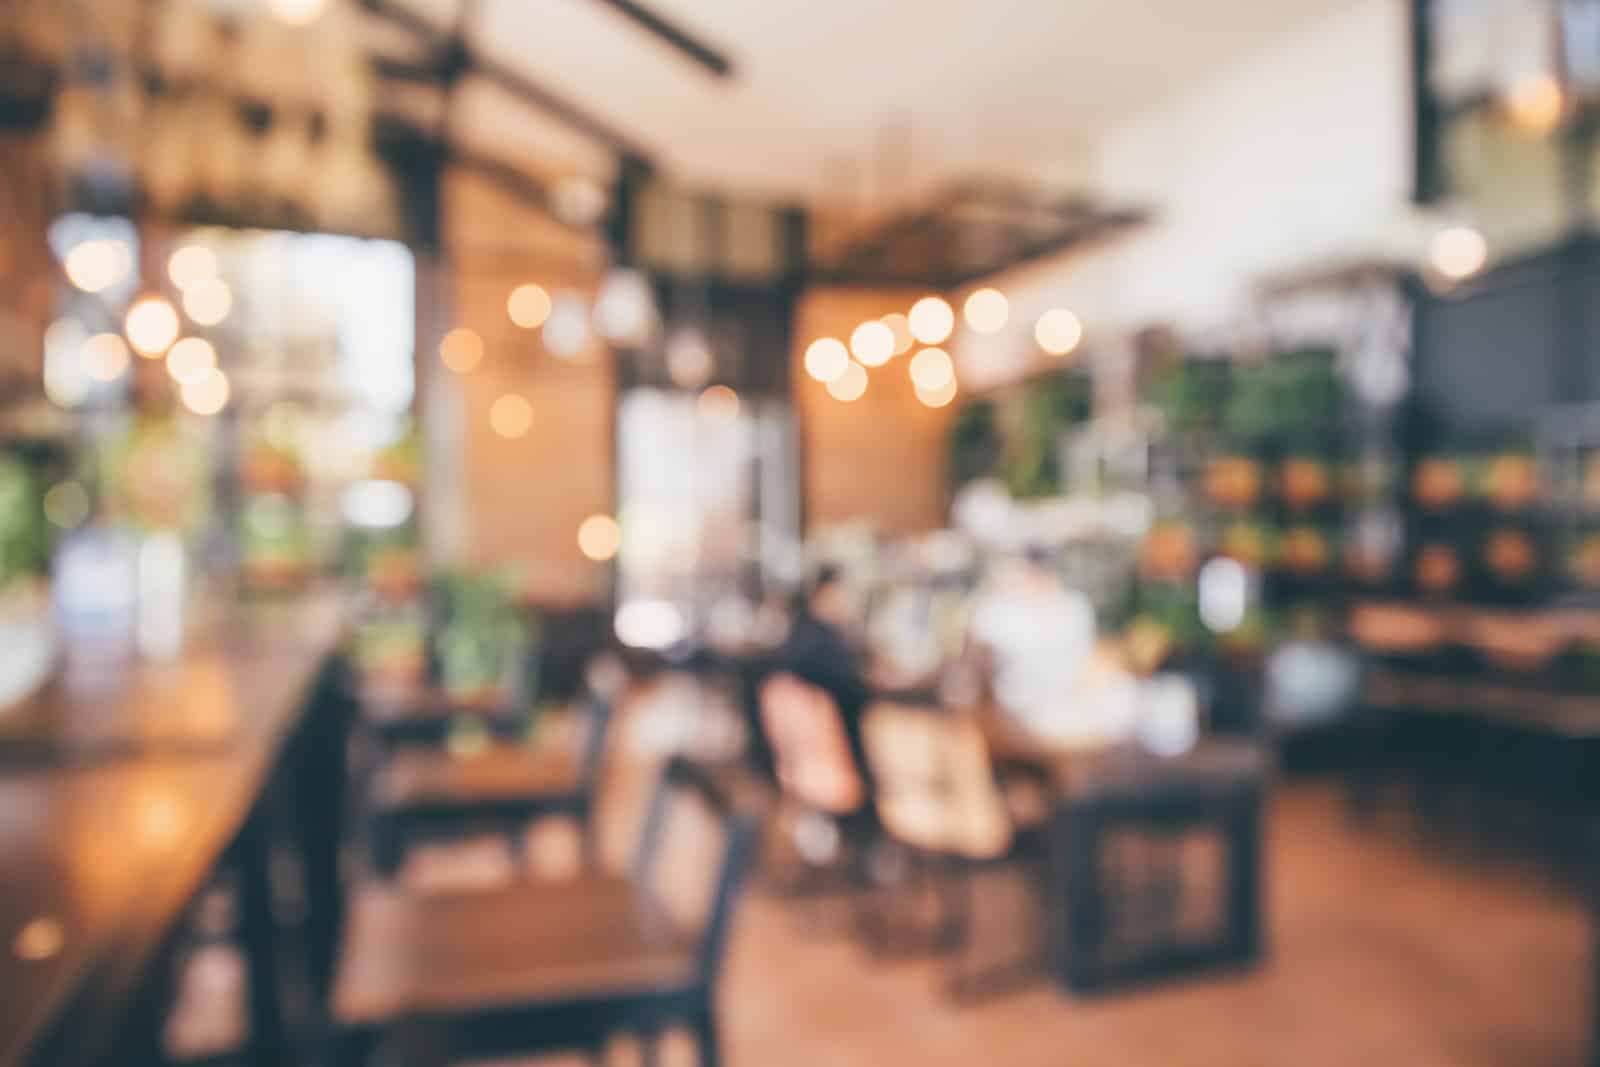 Ways To Revamp The Customer Experience in Your Restaurant